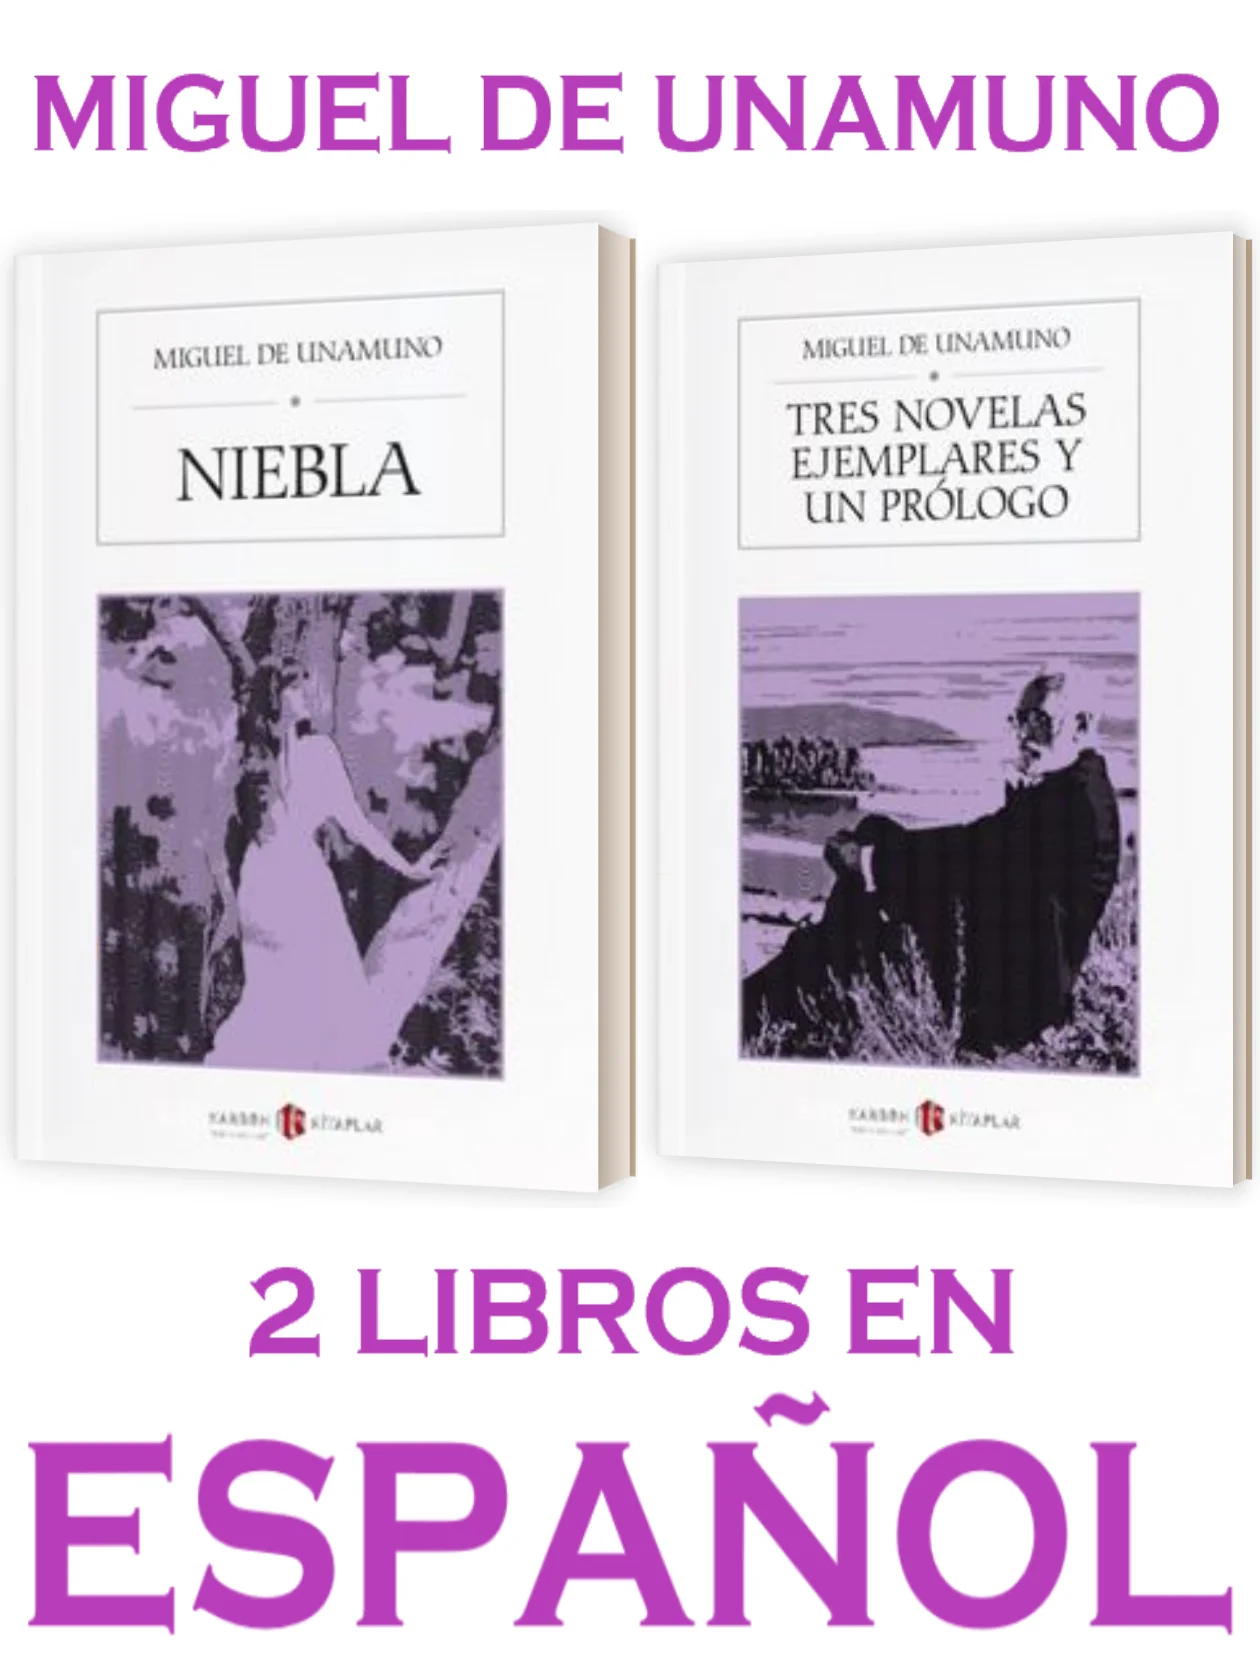 

NIEBLA & TRES NOVELAS EJEMPLARES Y UN PROLOGO of Miguel de Unamuno 2 Spanish Books Philosophical Novel Stories Nice Gift for Spanish Learners or your friends from Spain, Mexico and Latin America